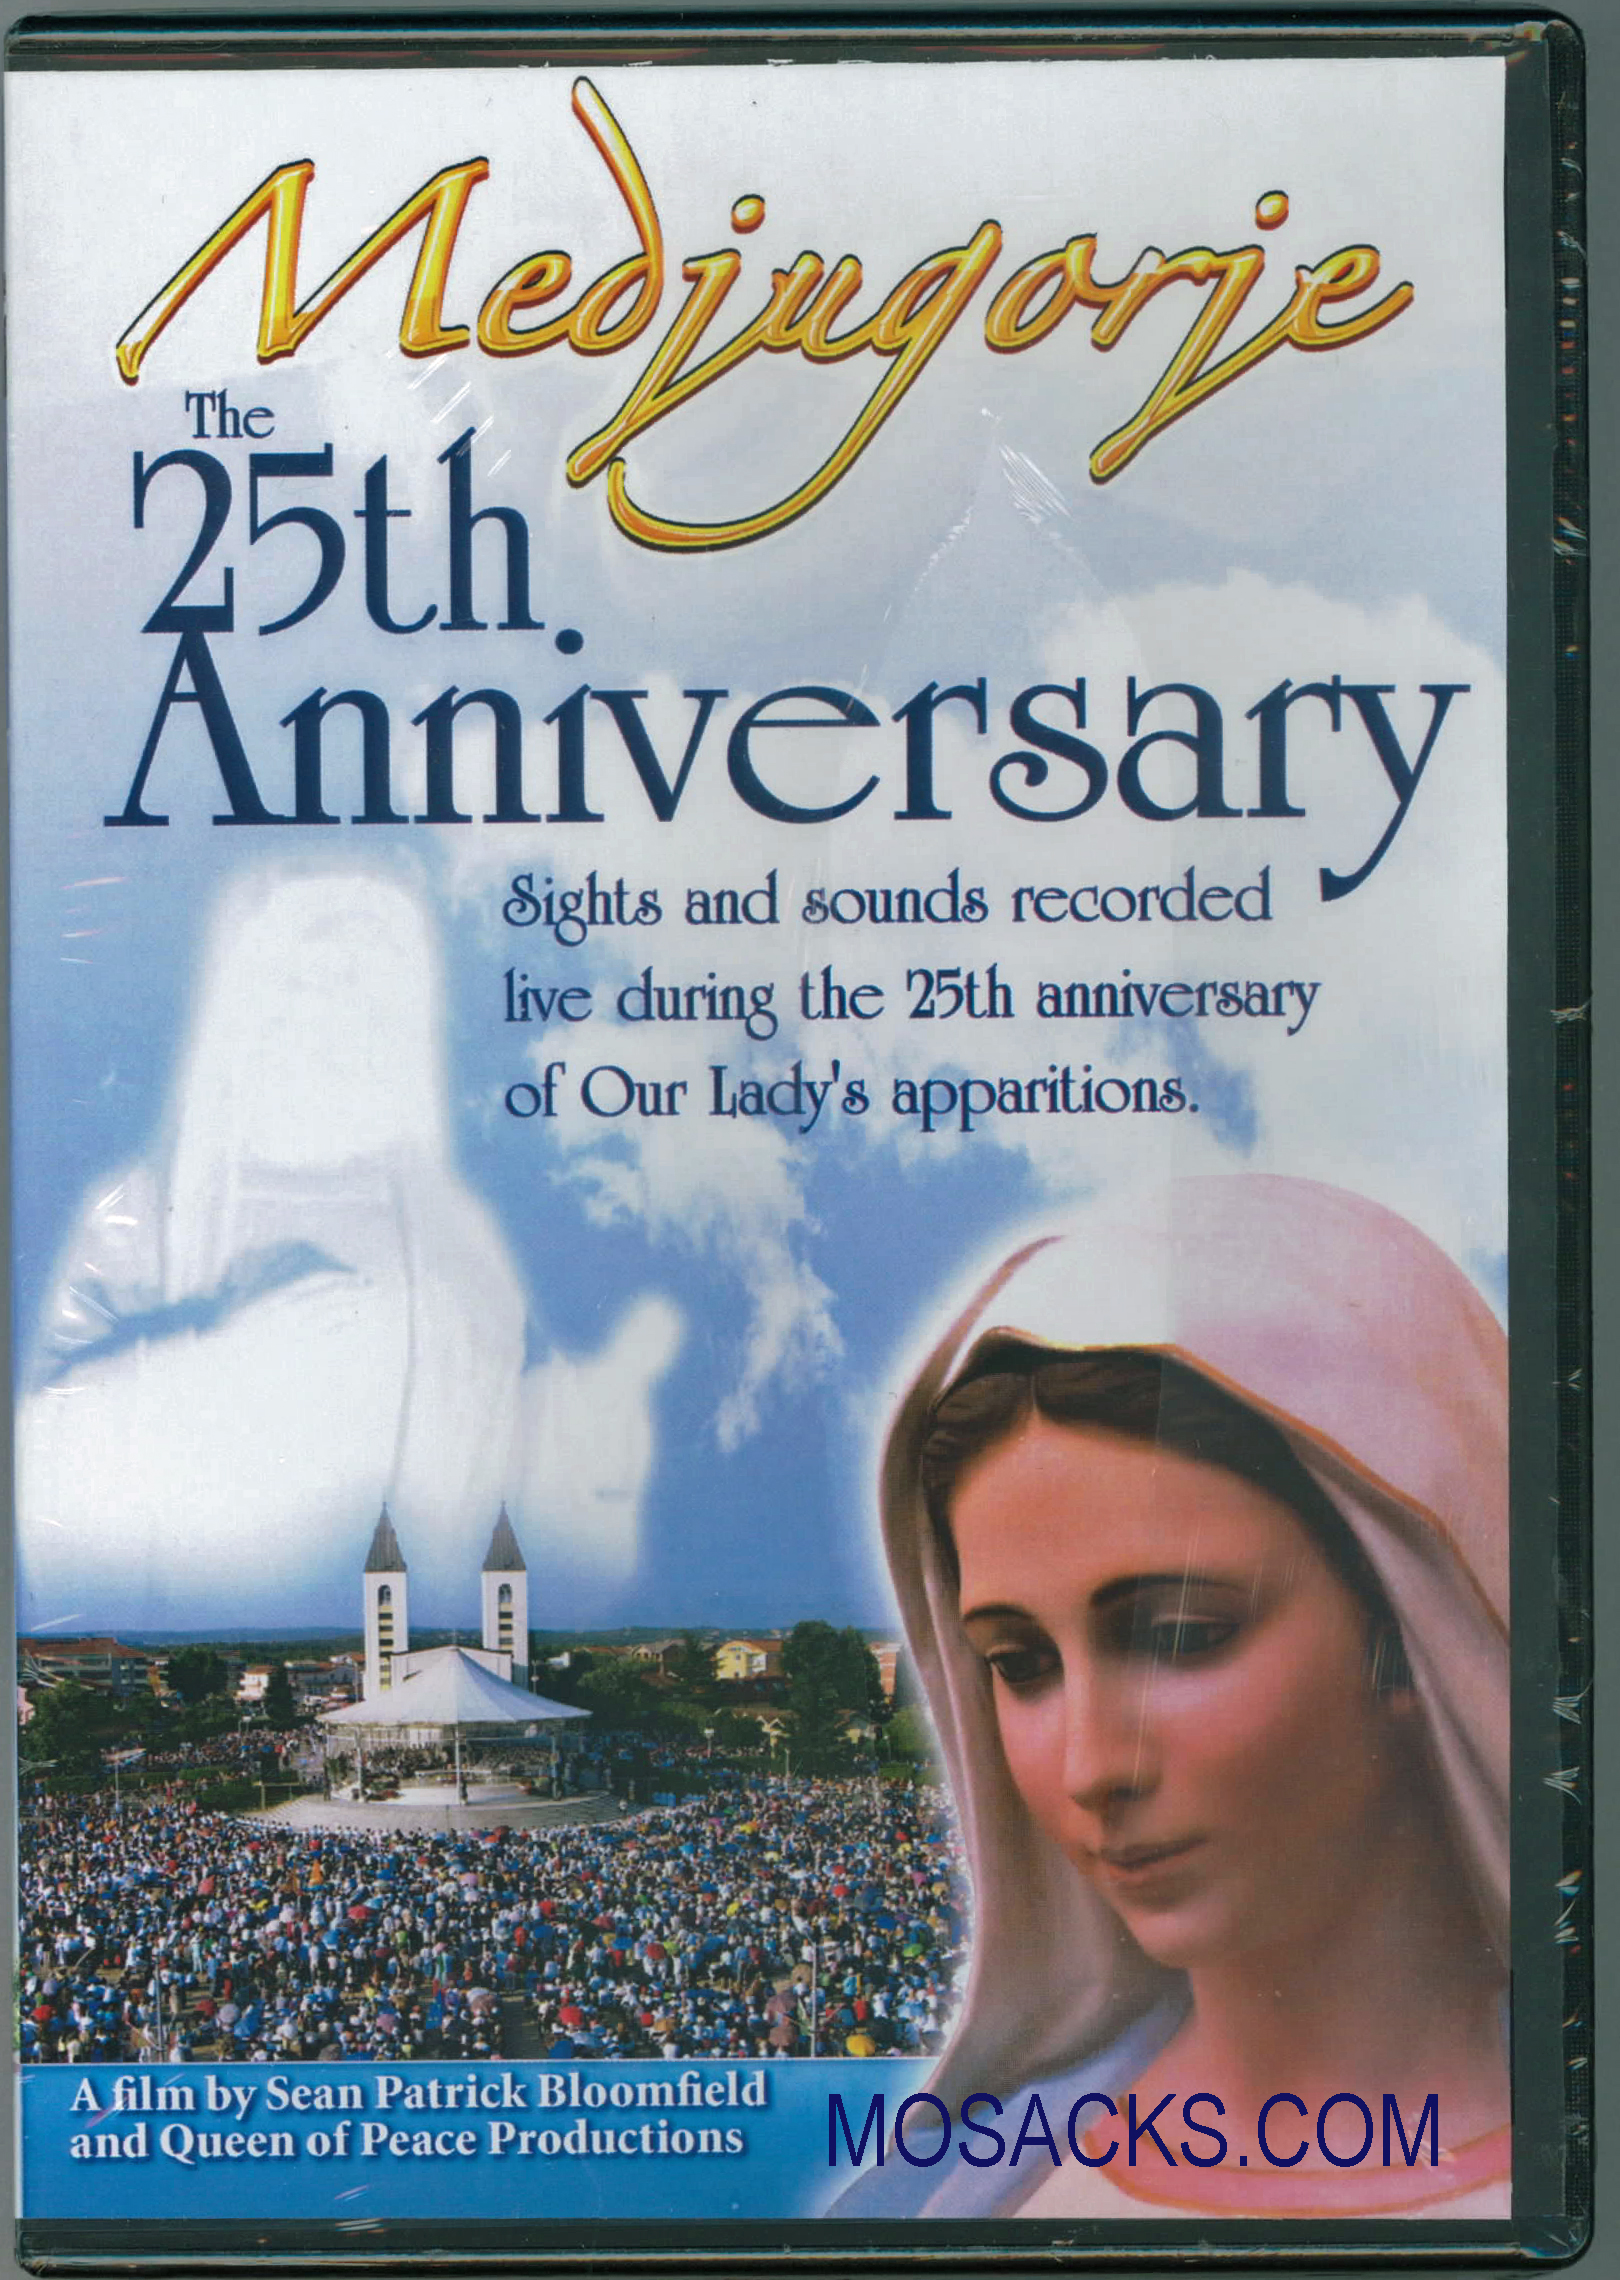 DVD-Medjugorje-The 25th Anniversary by Queen of Peace Productions 463-QOPP4